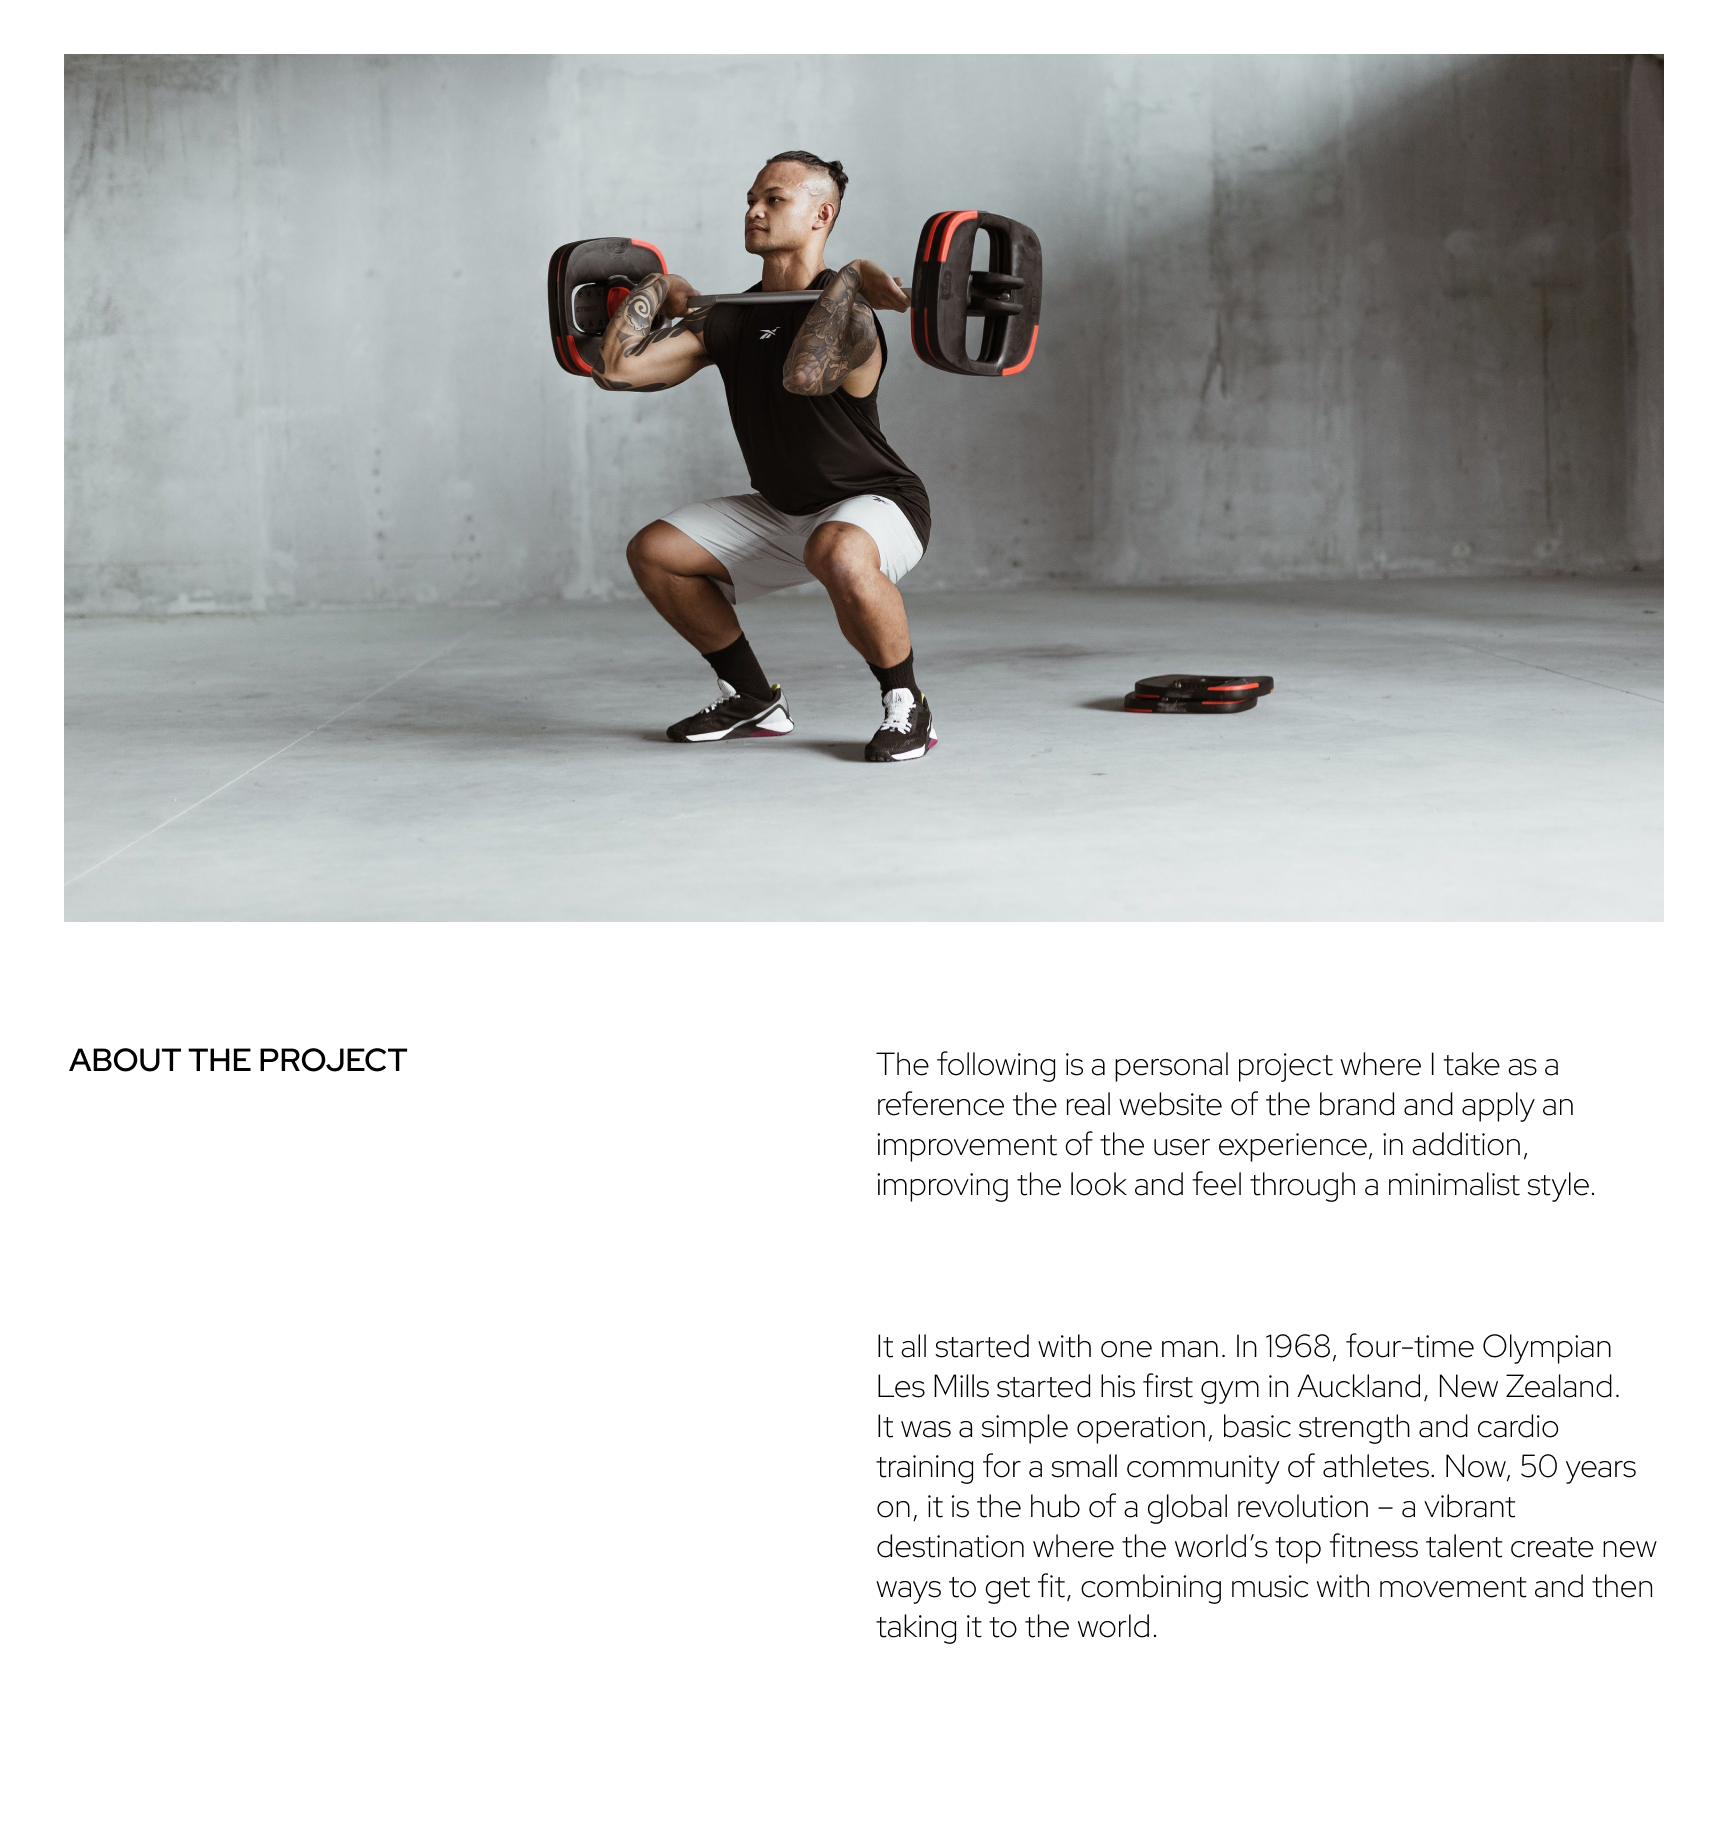 Fitness web site  Les Mills redesign concept by Franco Kaus on Dribbble